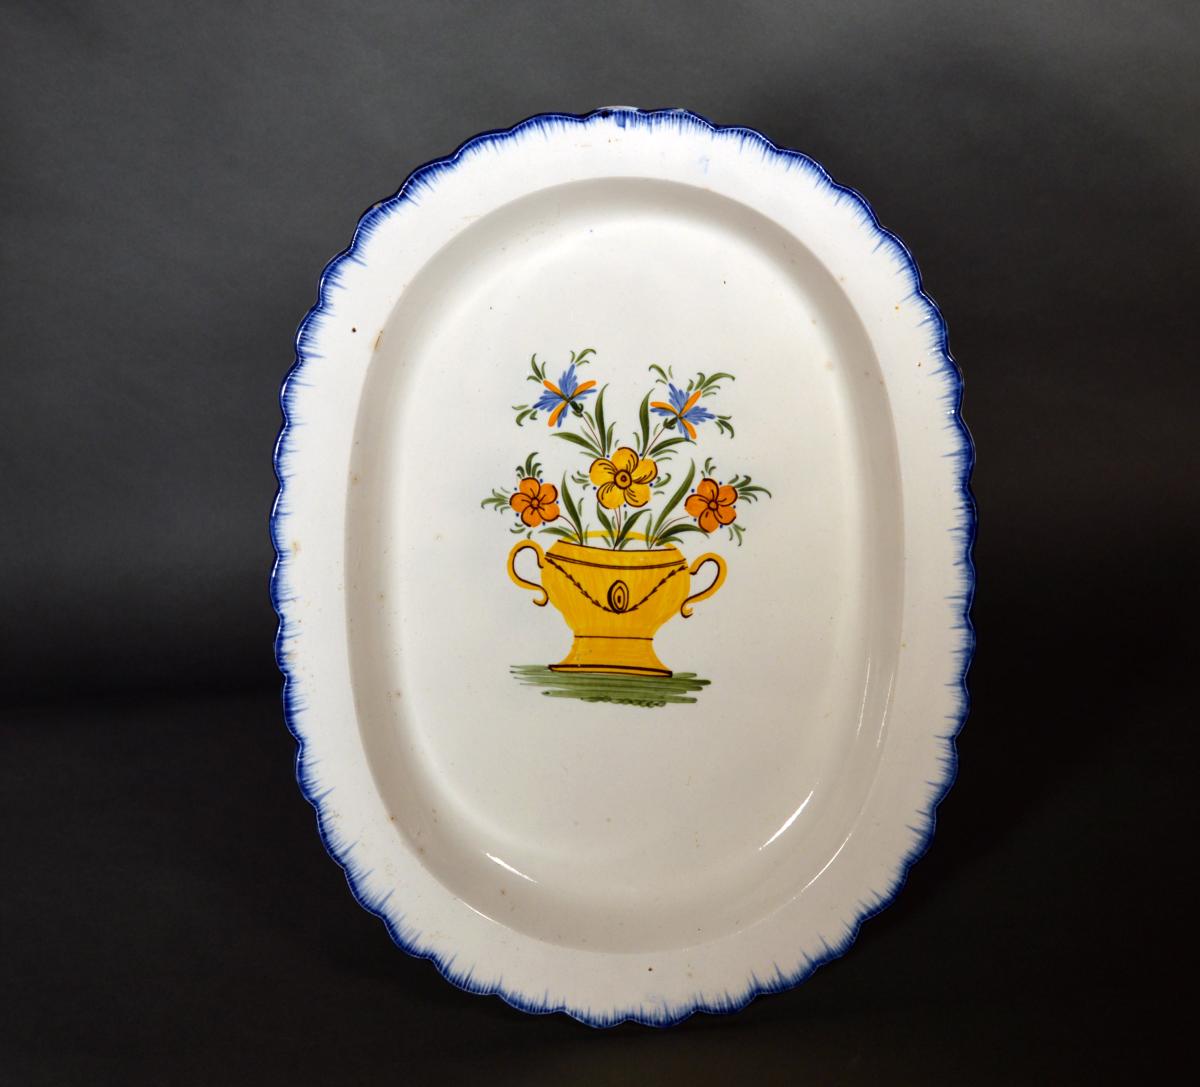 Shell-edge Prattware Oval Pearlware Dish painted with An Urn of Flowers